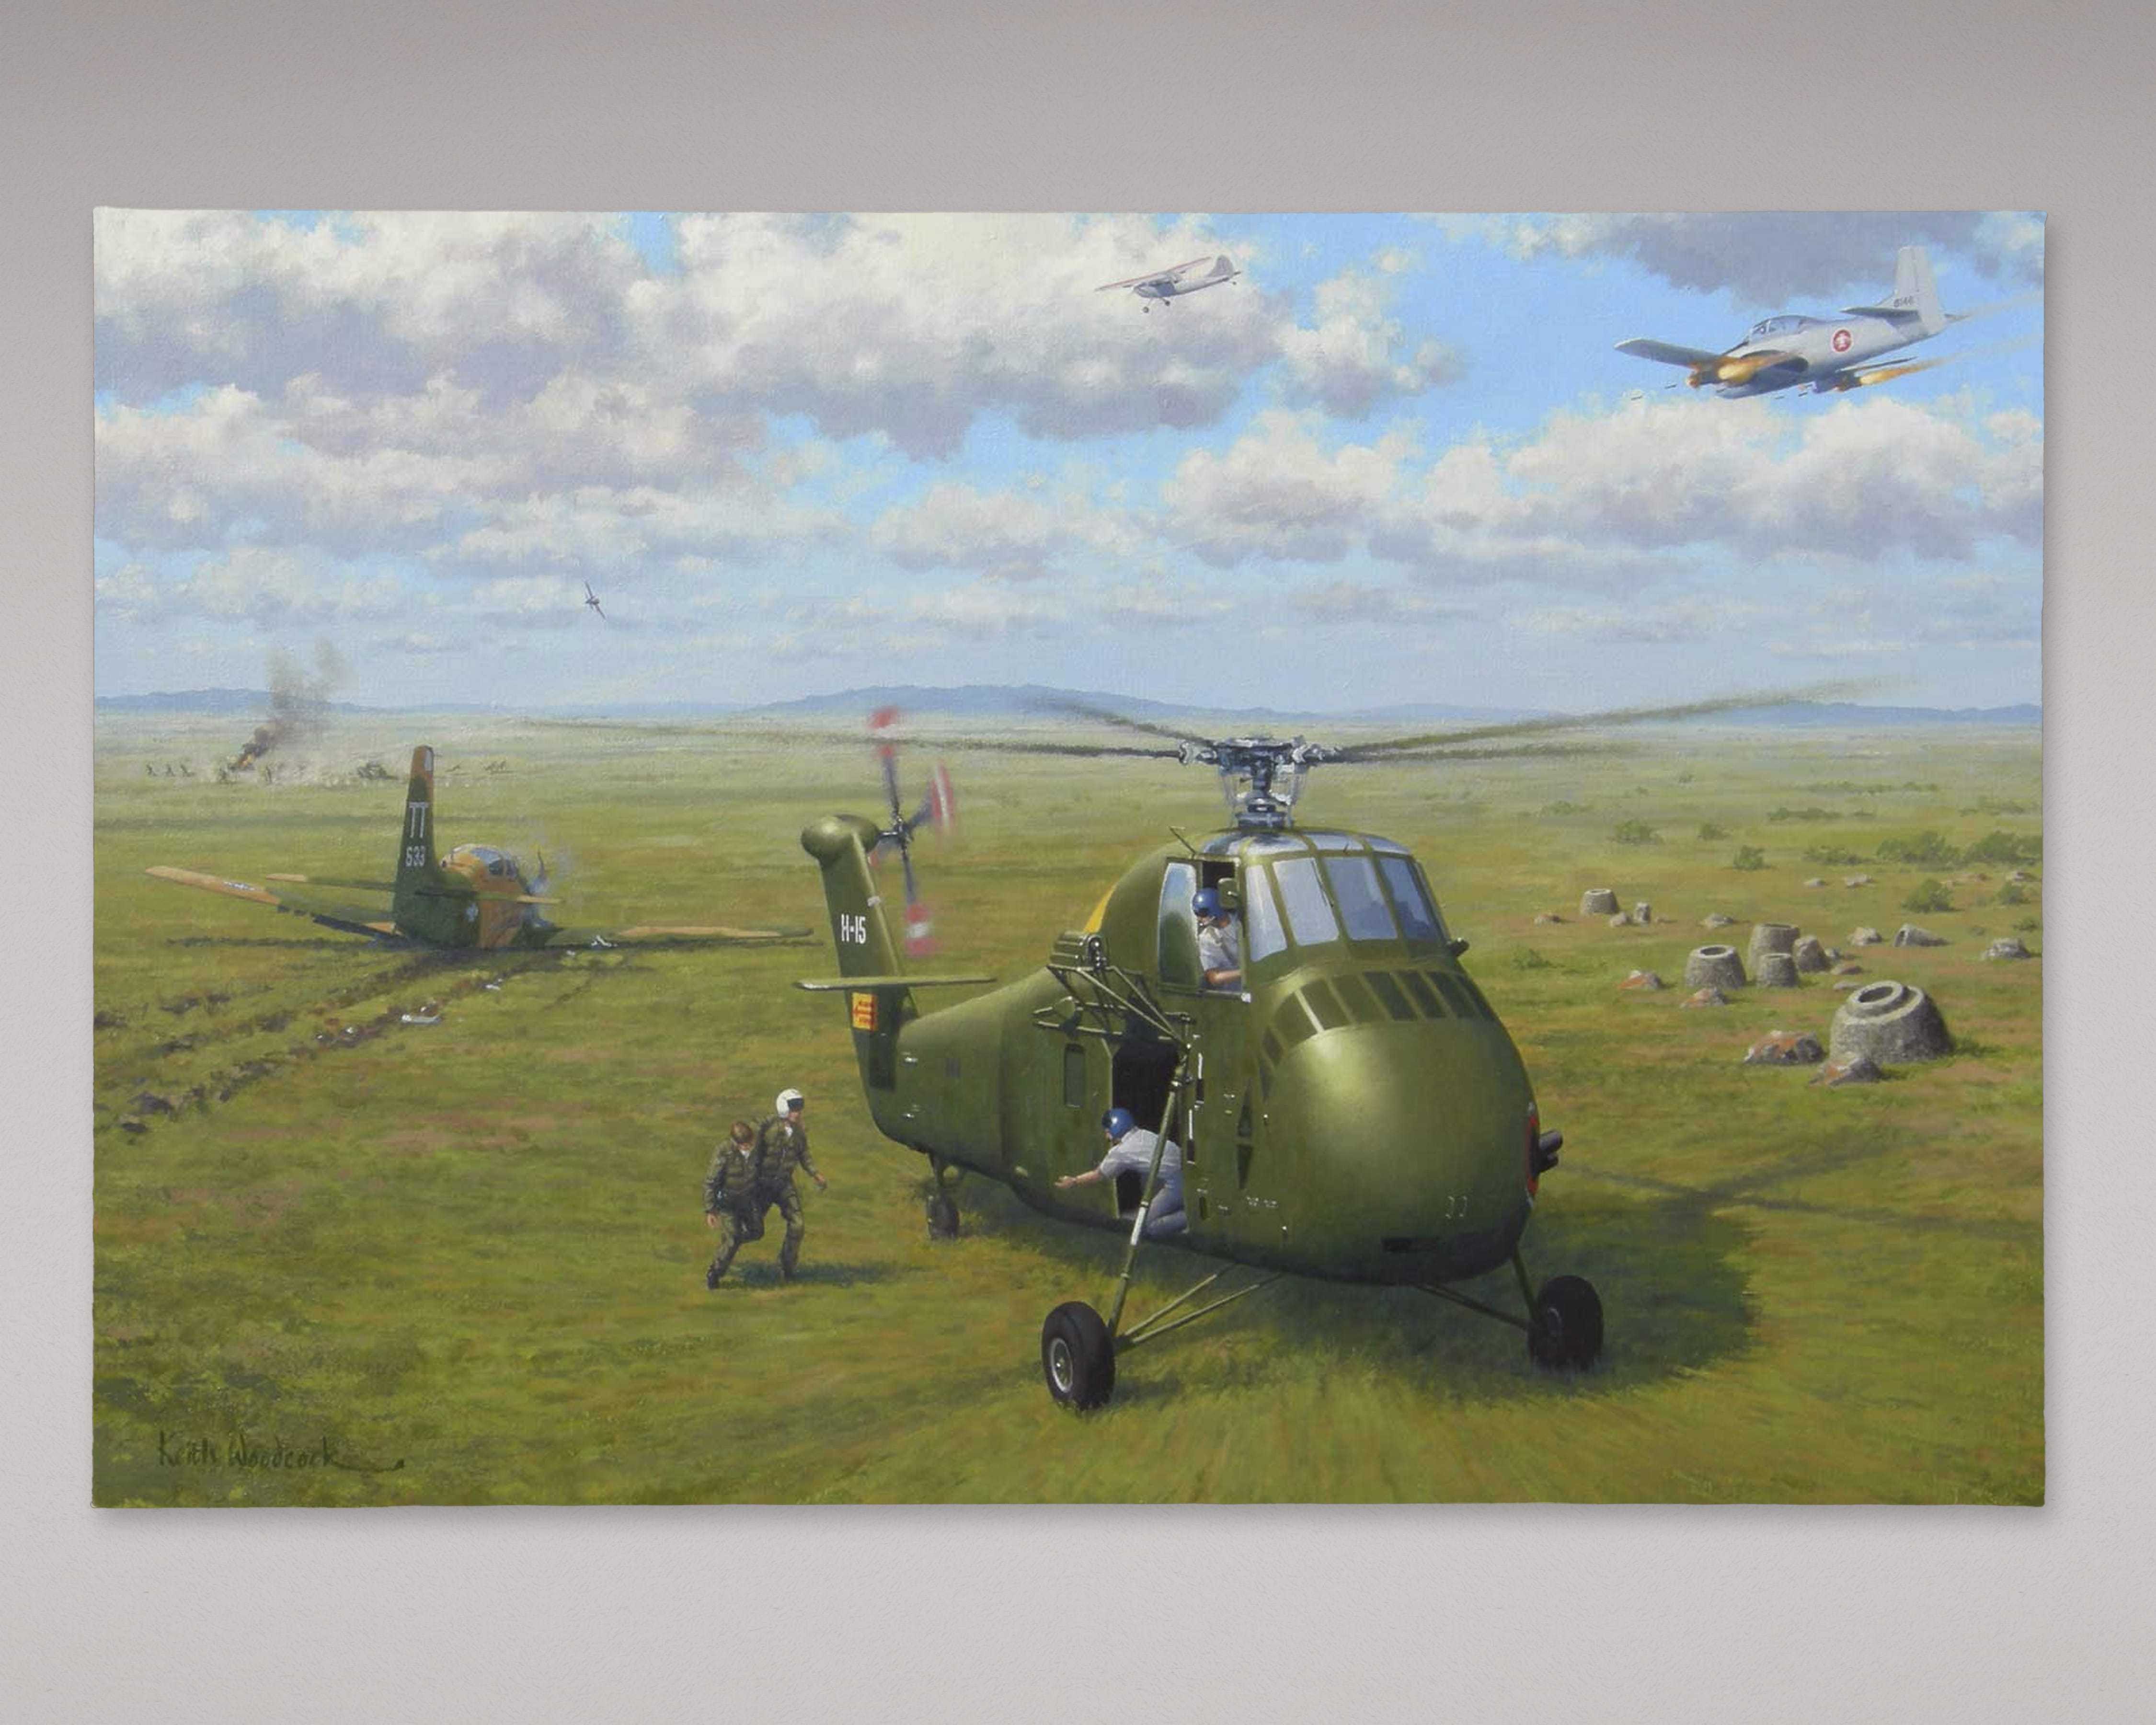 A painting depicting a small plane and a military helicopter in a large grass field